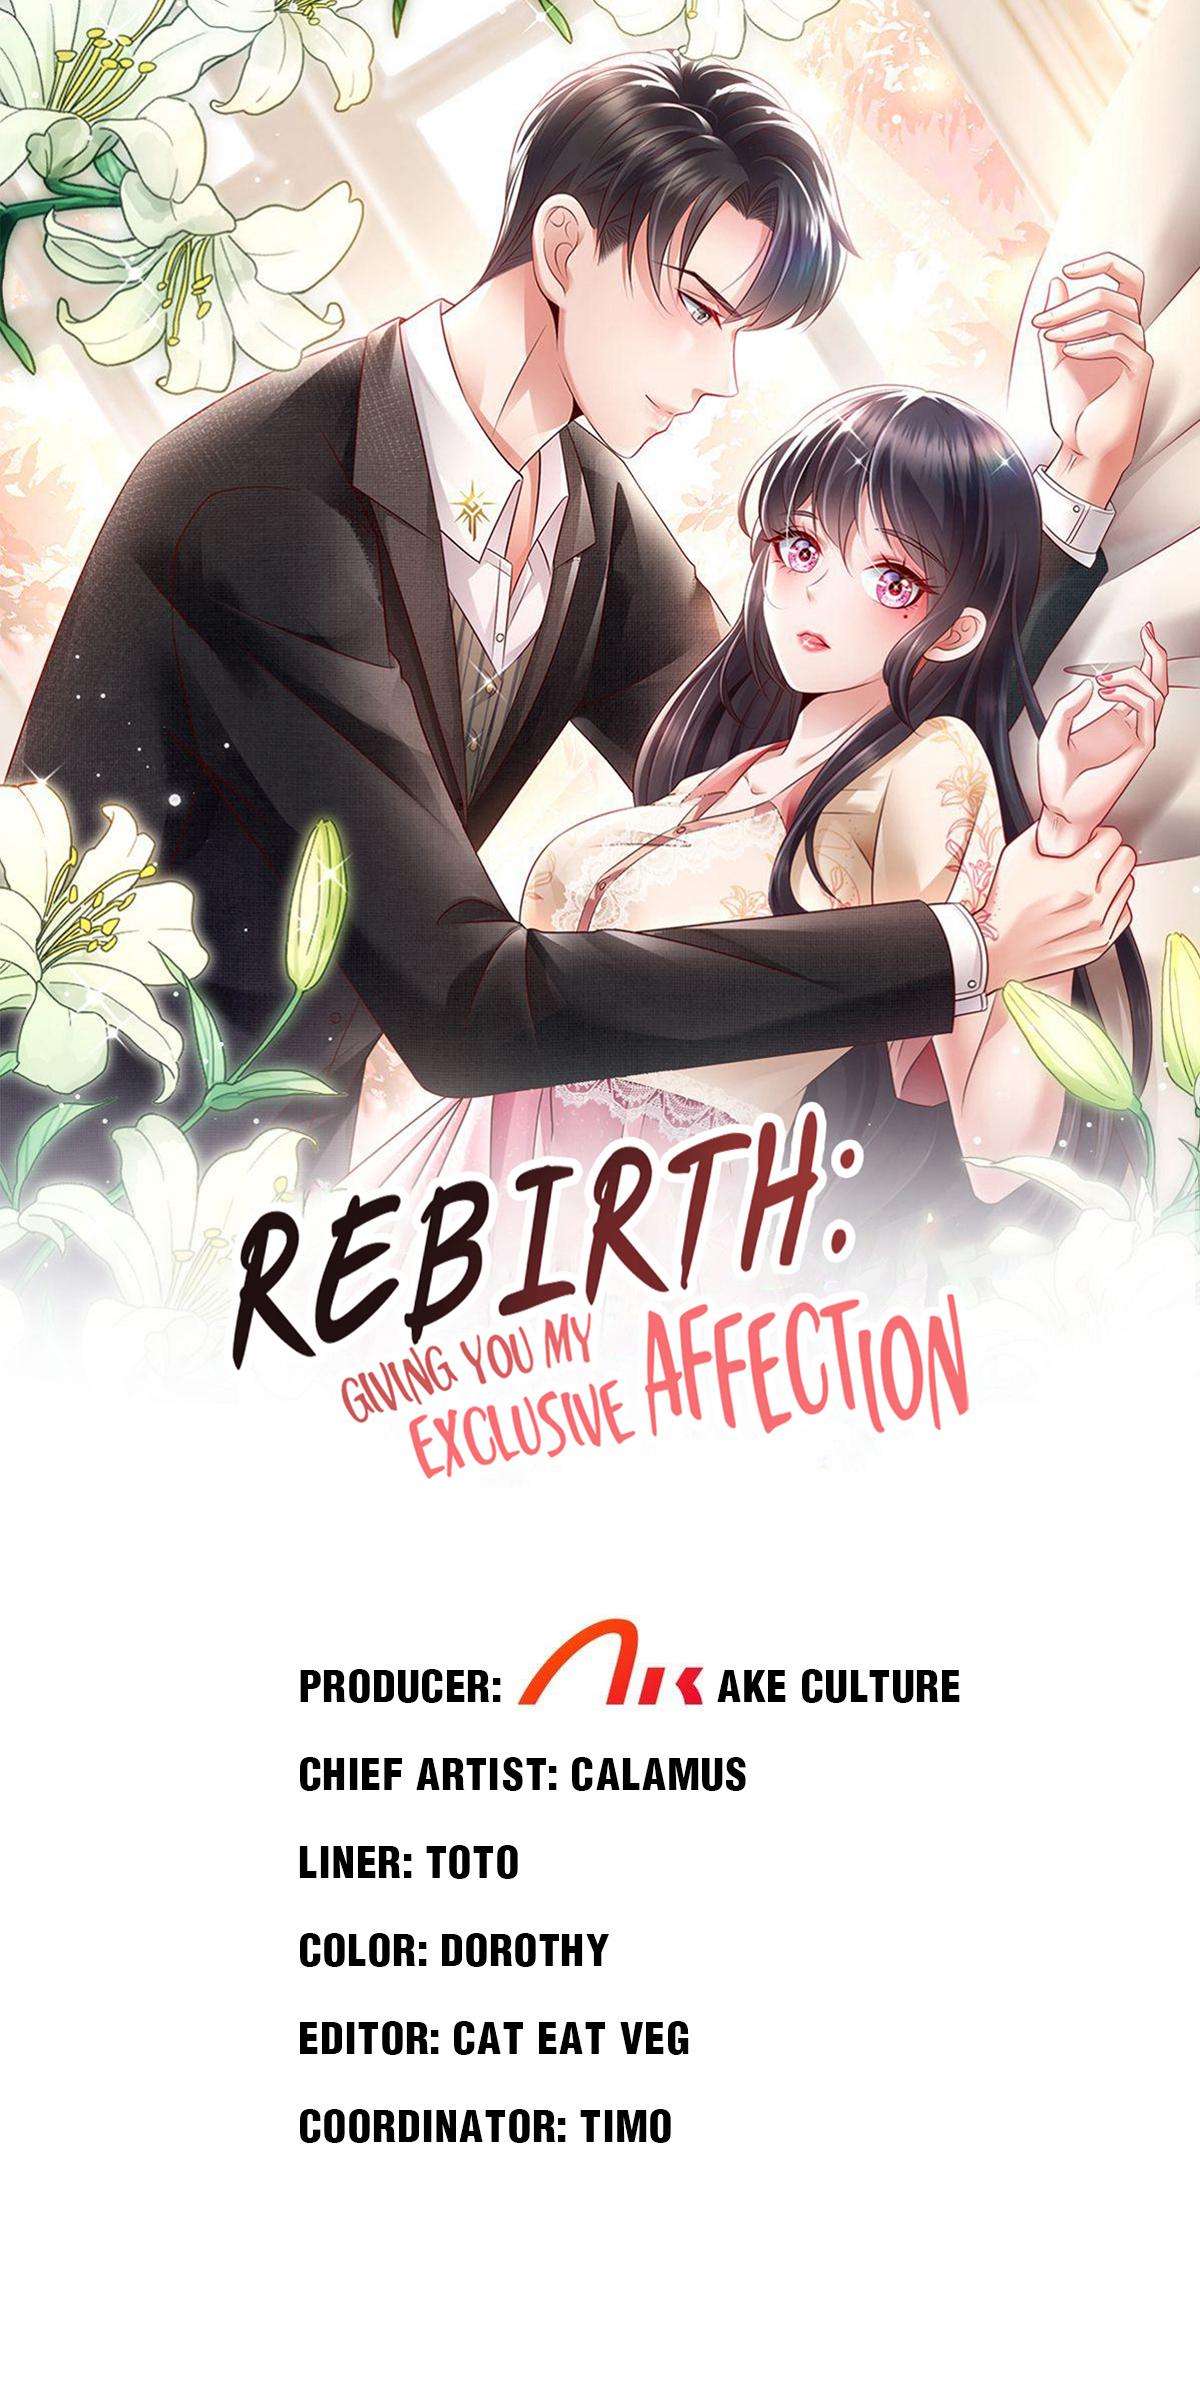 Rebirth: Giving You My Exclusive Affection 137